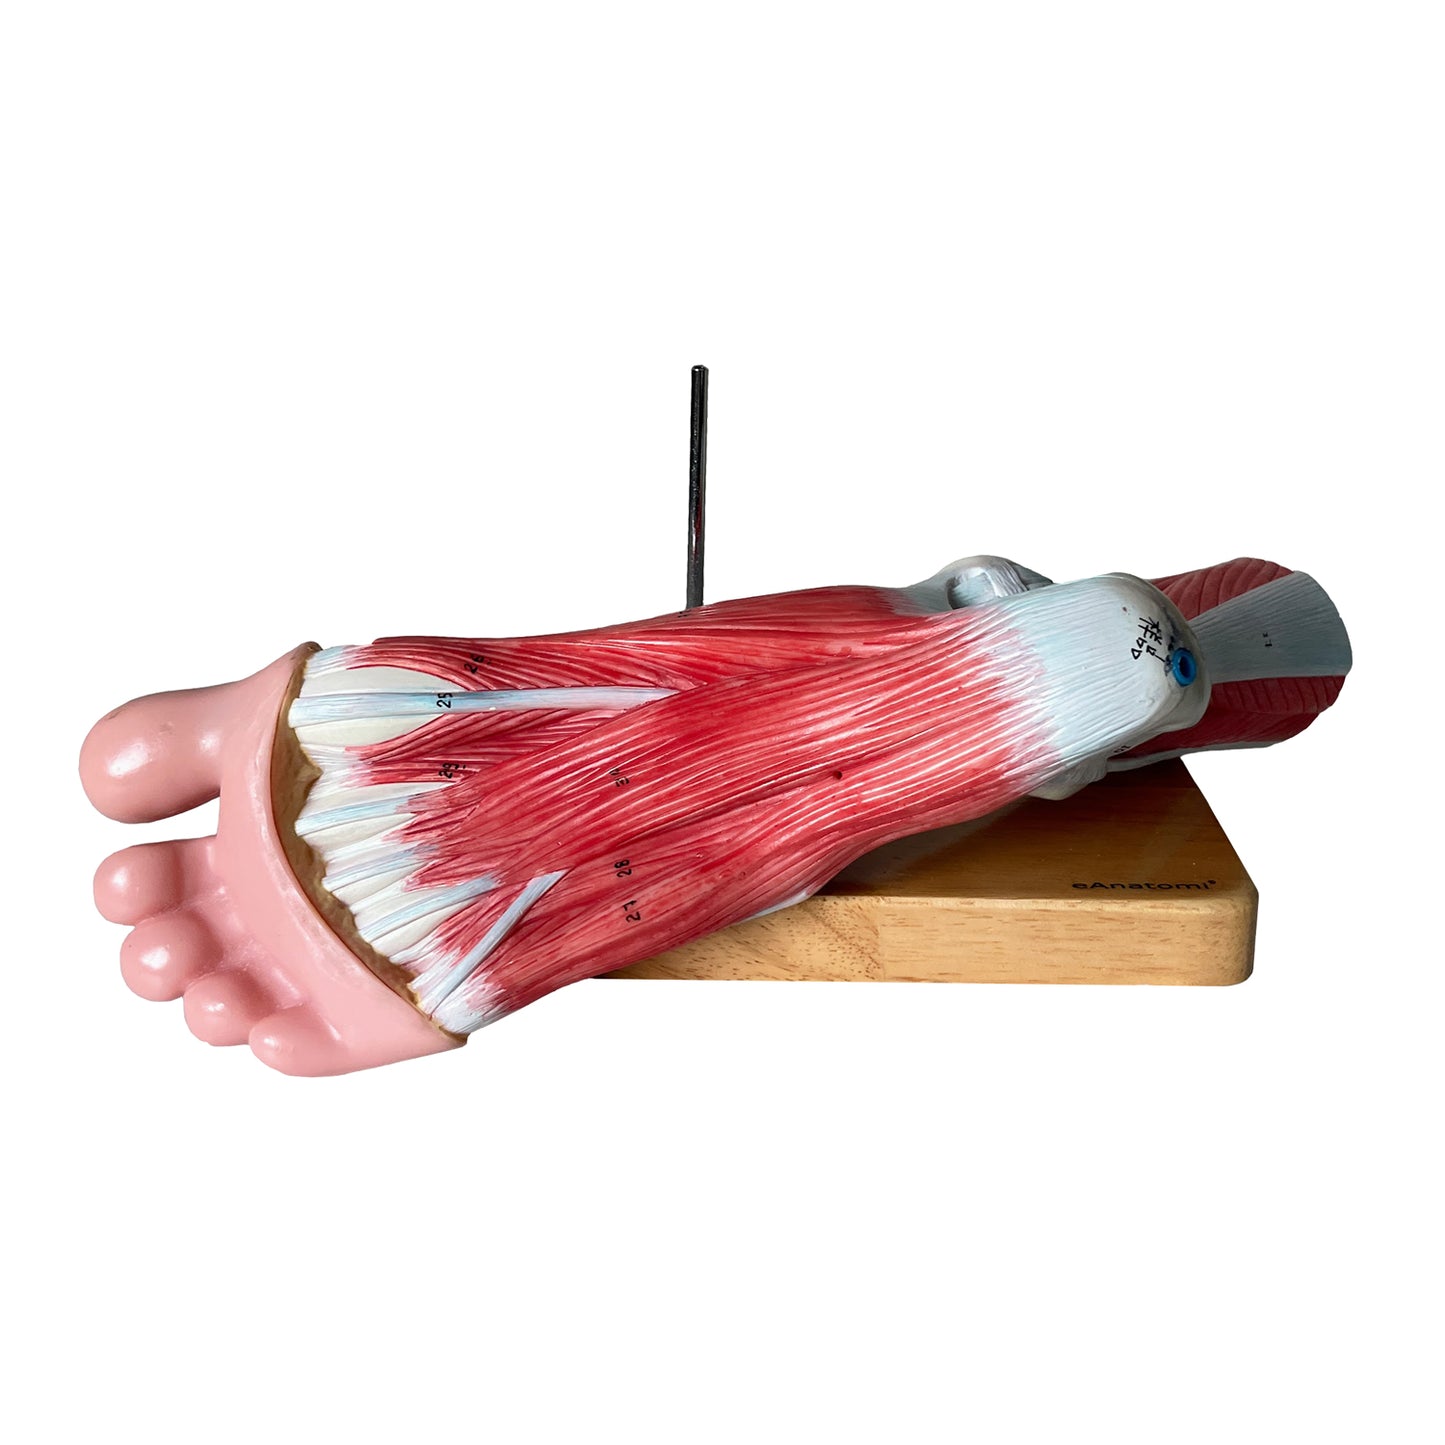 Foot model with visible muscles and ligaments